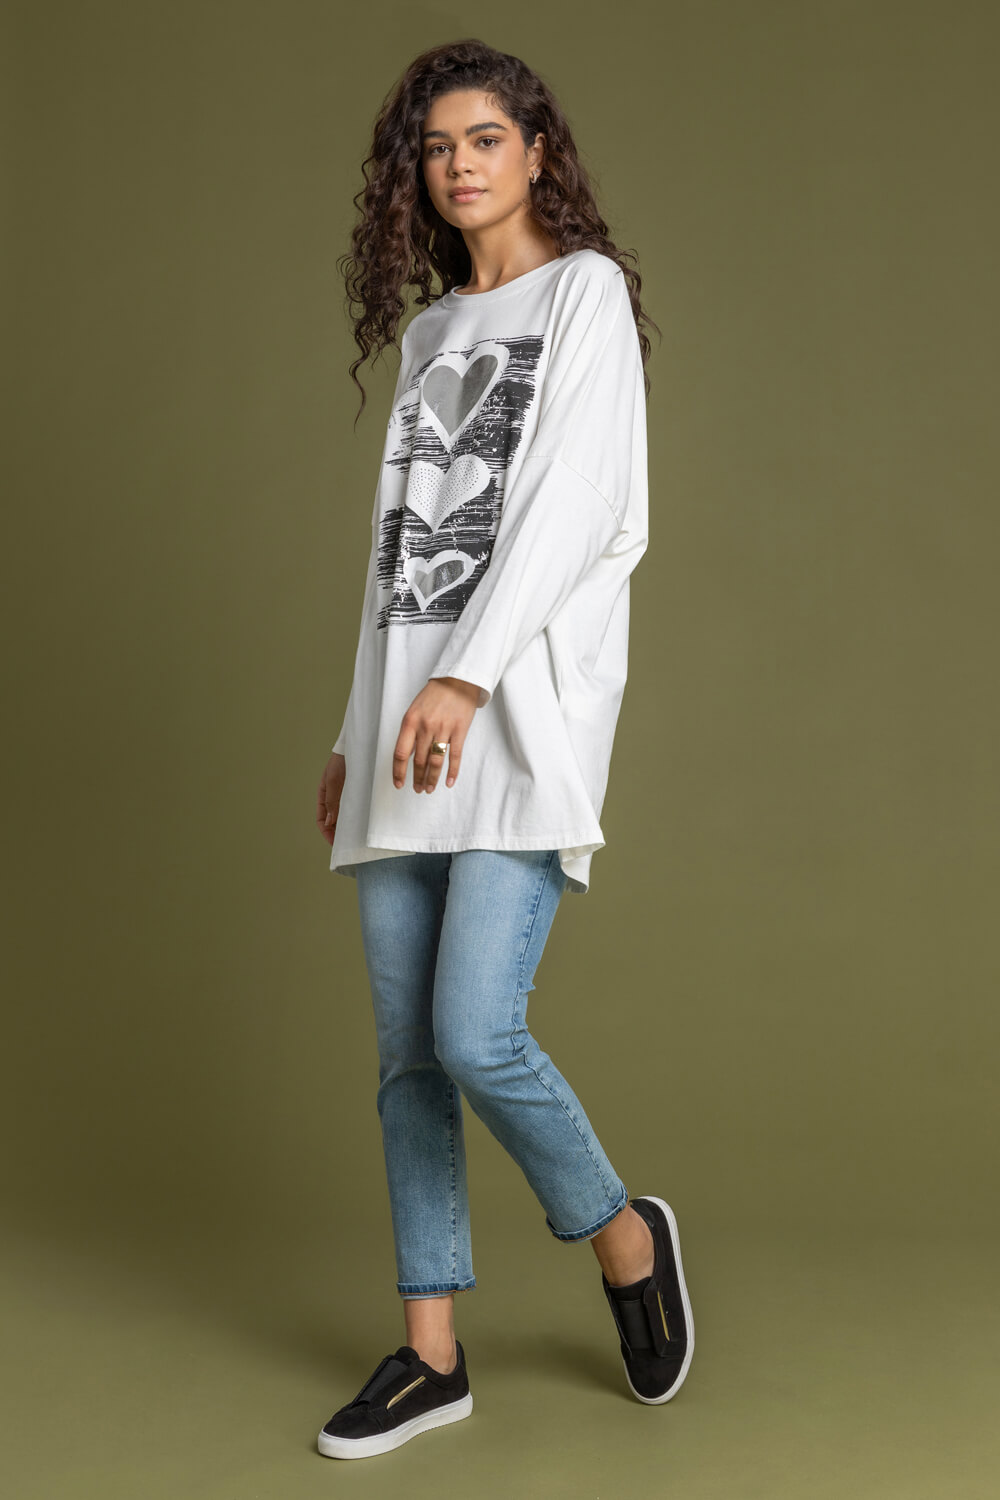 White Foil Heart Print Embellished Tunic Top, Image 3 of 4